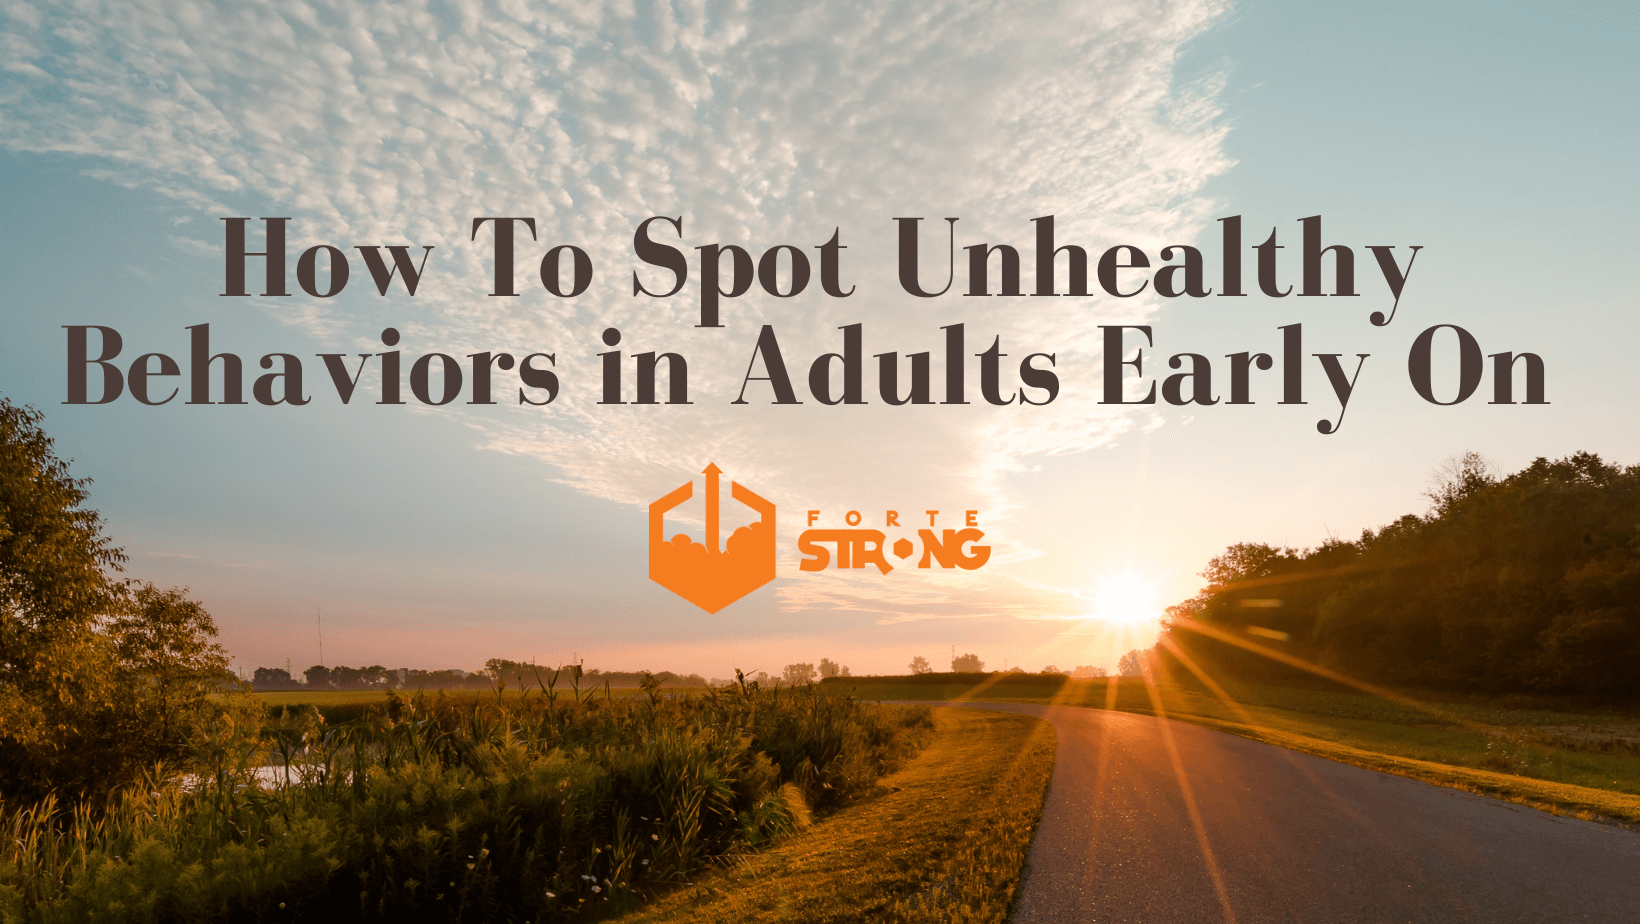 How To Spot Unhealthy Behaviors in Young Adults Early On